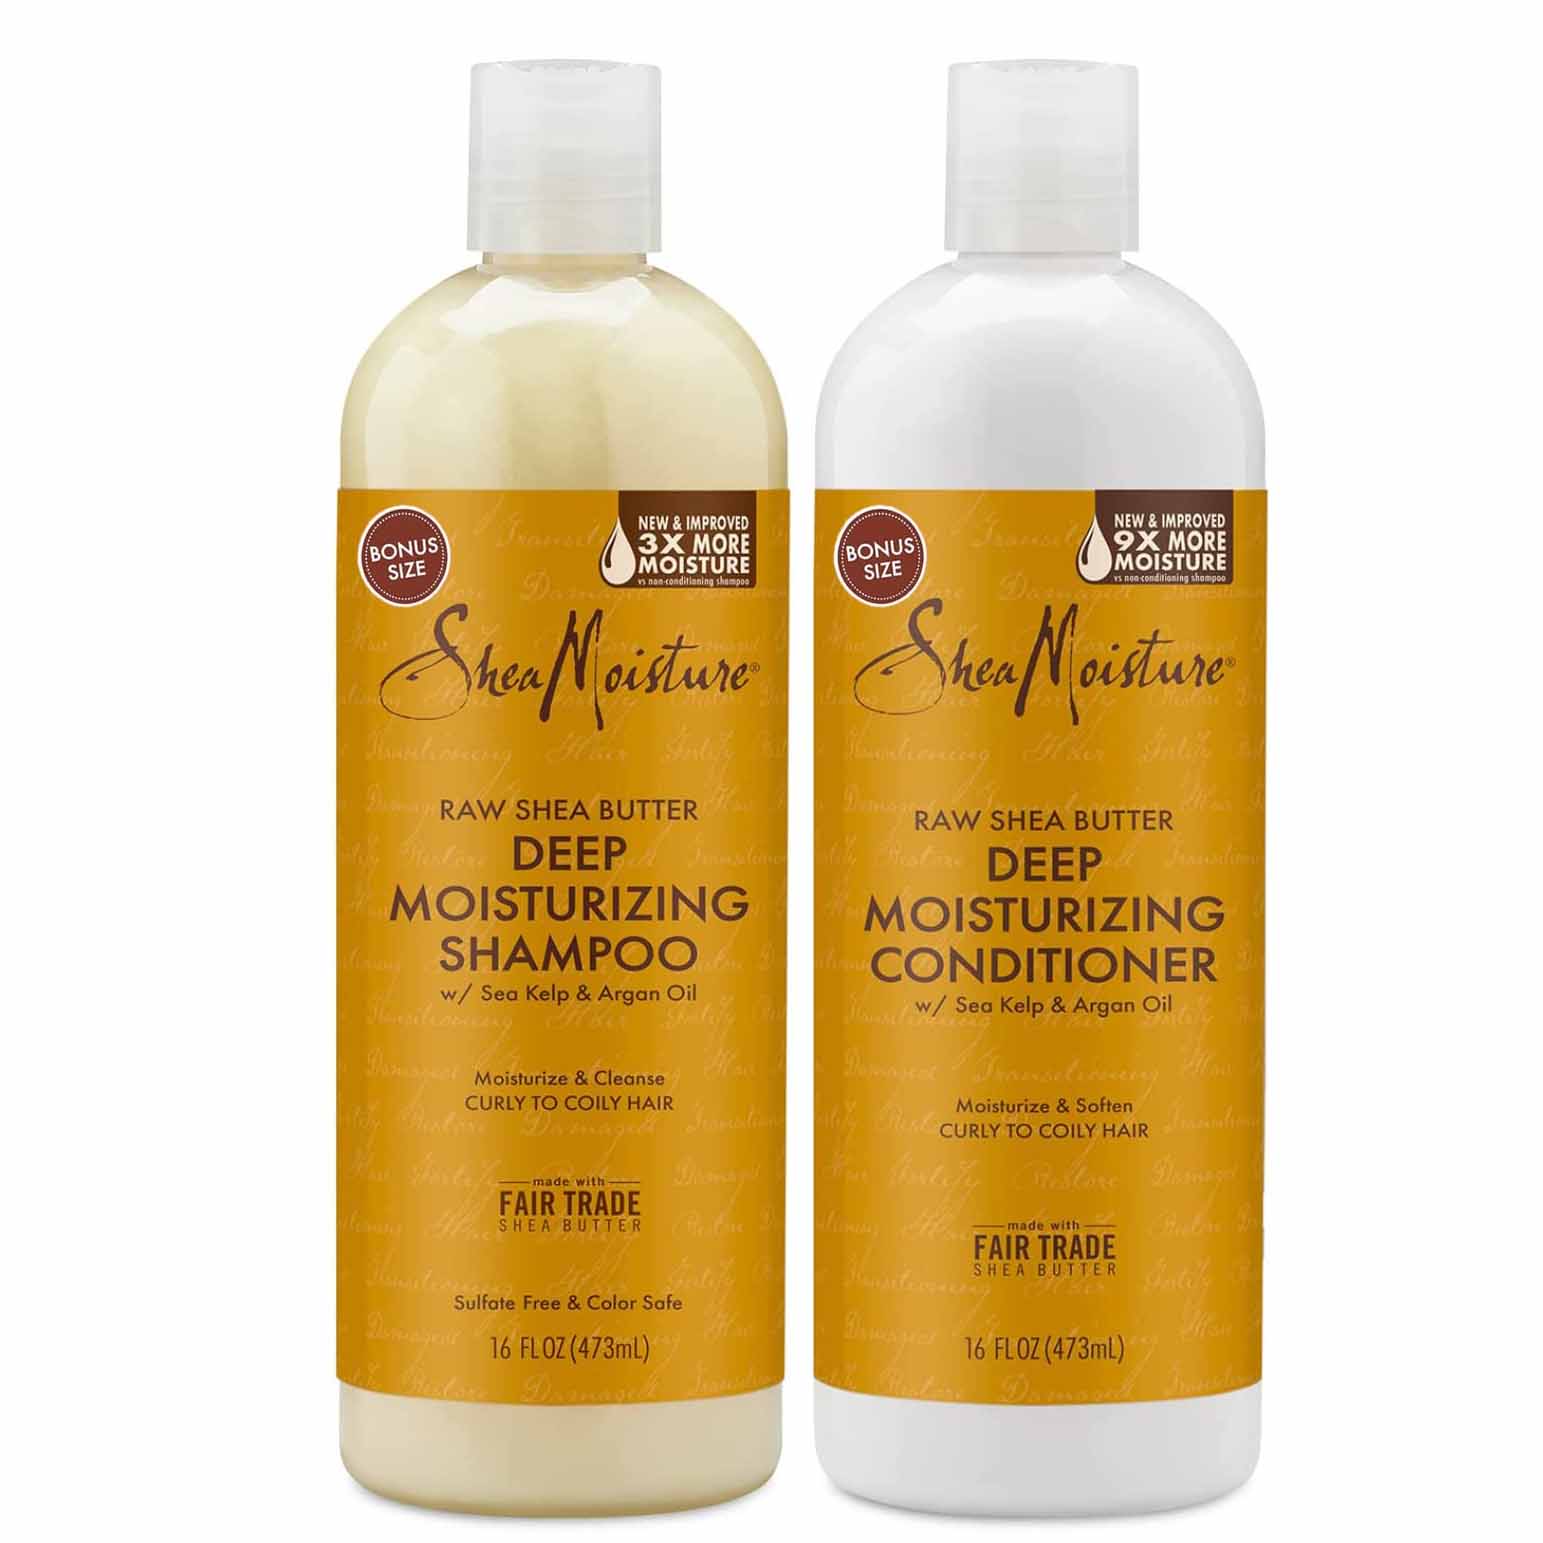 a twin set of Shea Moisture Raw Shea Butter Shampoo and Conditioner